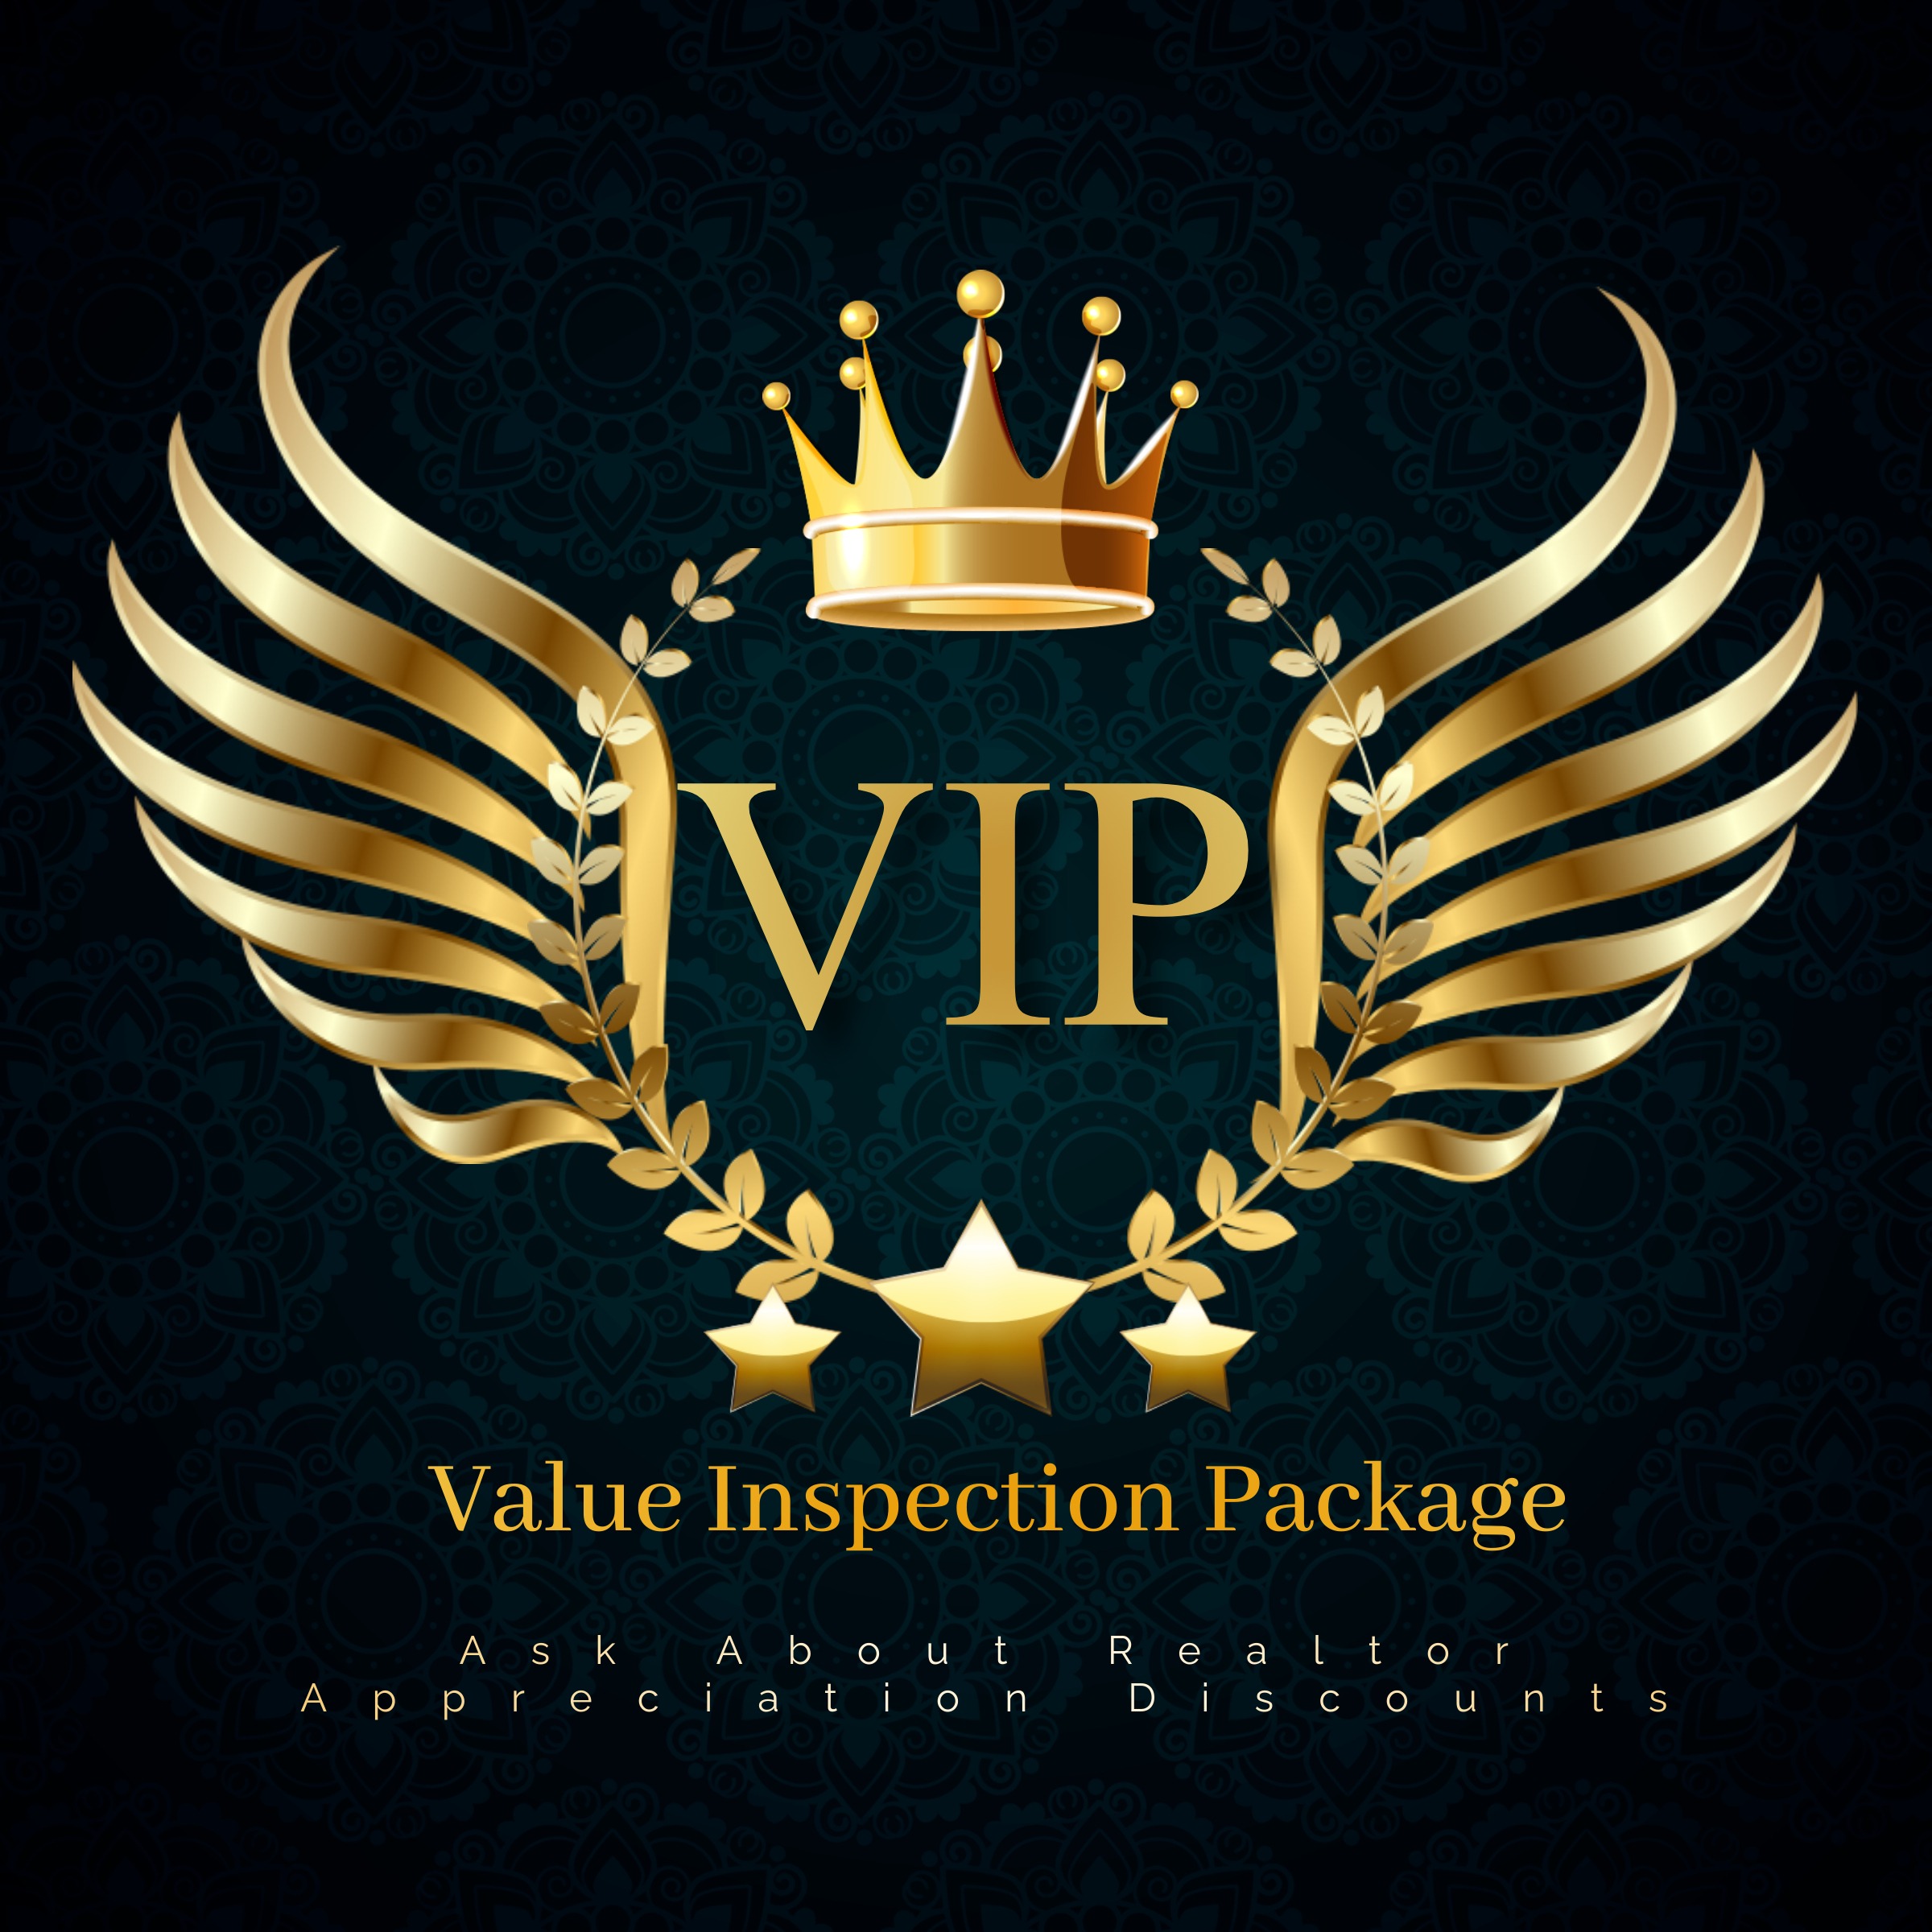 Value Inspection Package